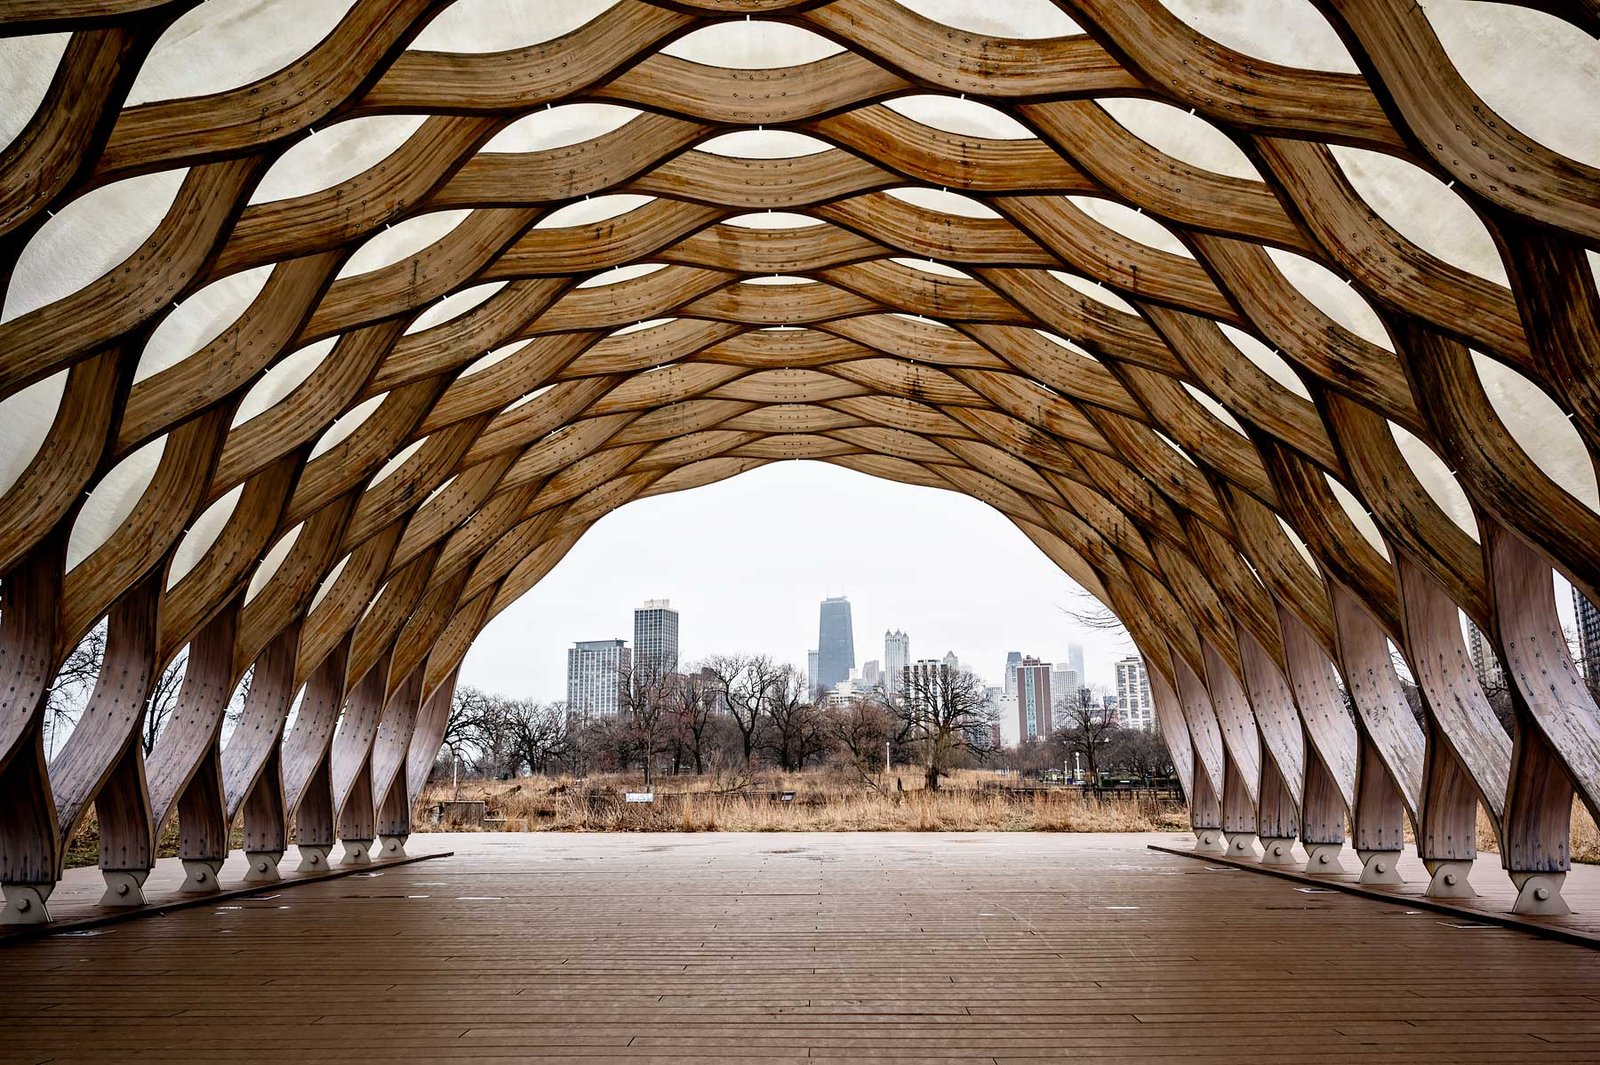 Pavilion at the Nature Boardwalk Lincoln Park Zoo. The 15 Best Things to Do and See in Chicago